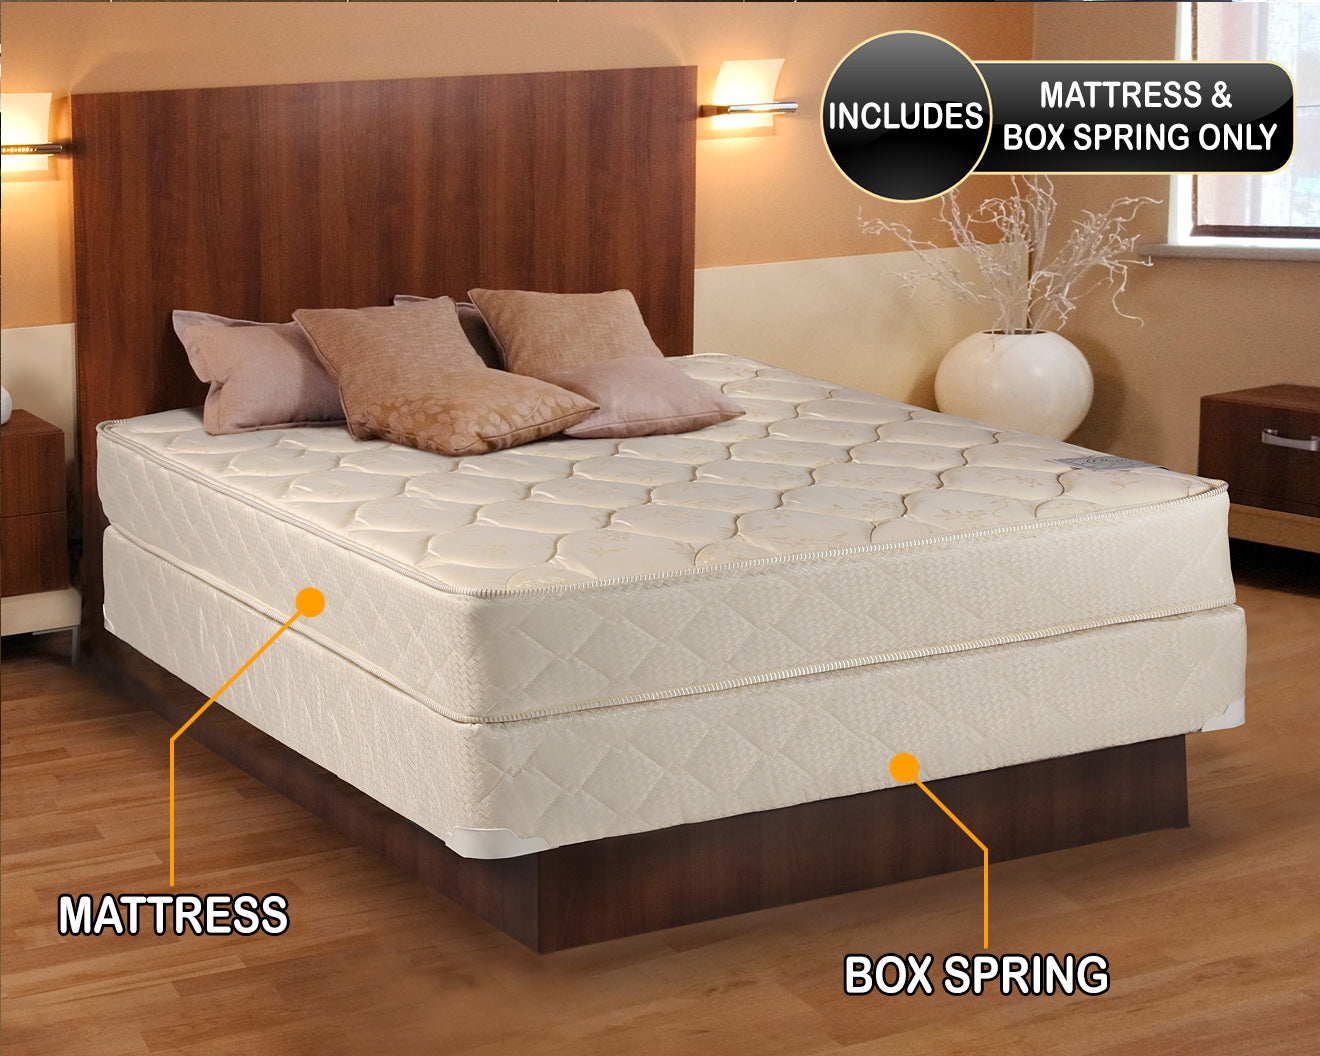 Comfort Classic Gentle Firm Twin Size Mattress and Box Spring Set - Fully Assembled, Orthopedic, Good for Your Back - Long Lasting and 1 Sided